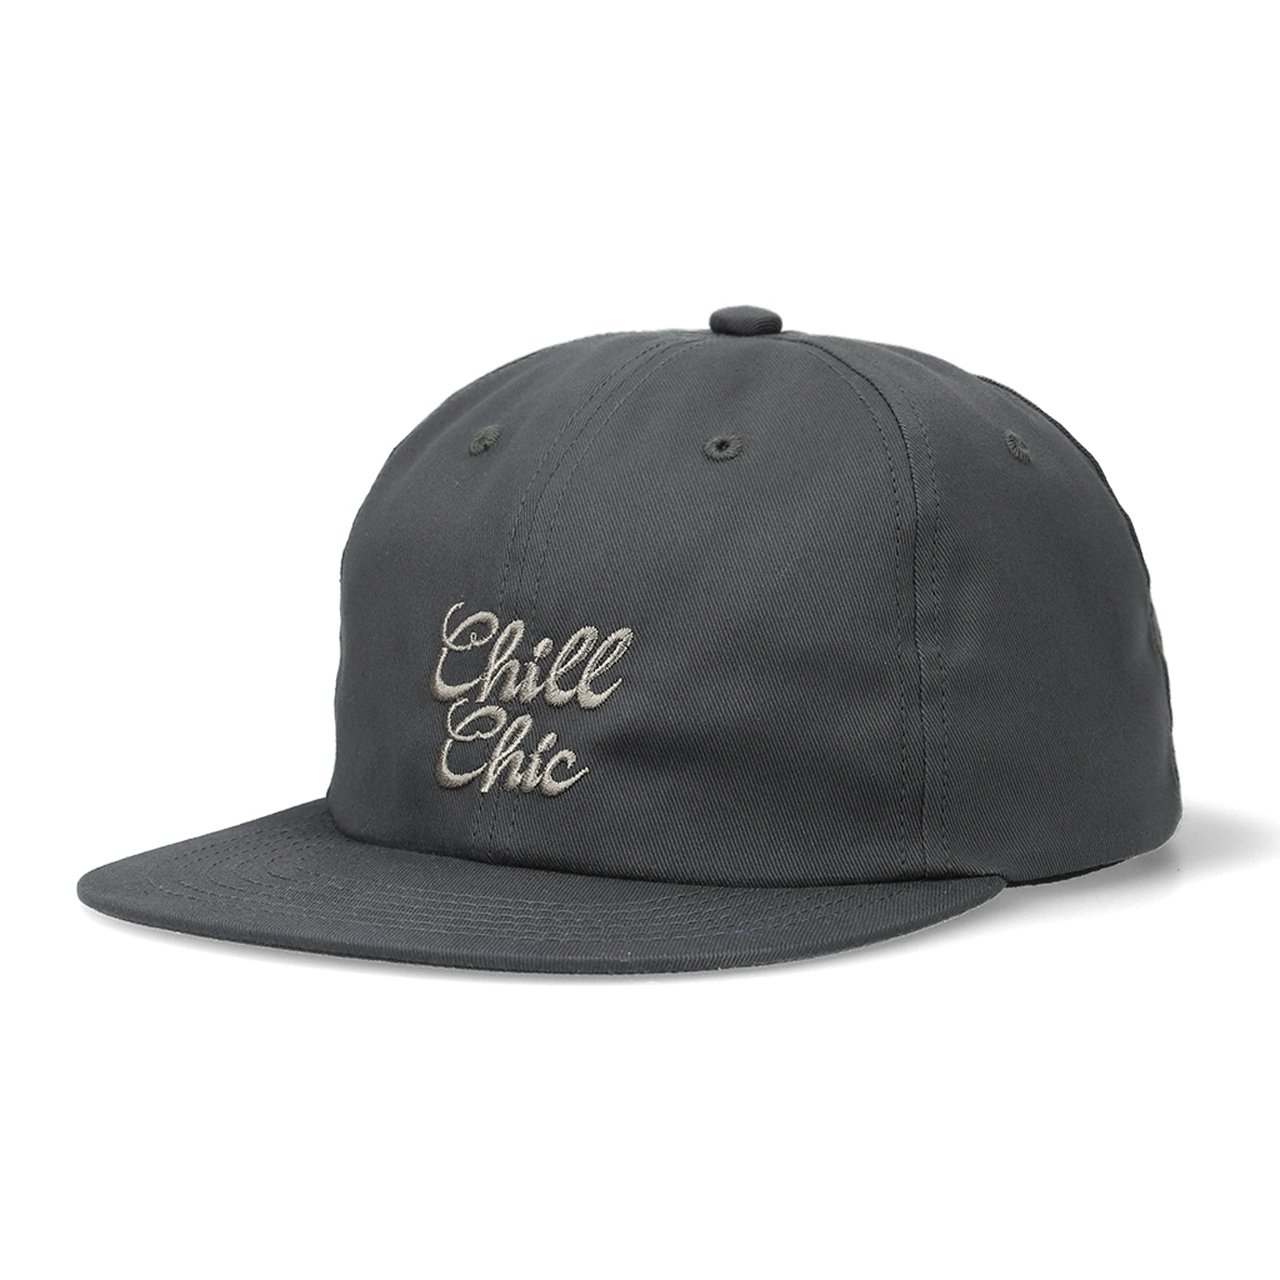 <img class='new_mark_img1' src='https://img.shop-pro.jp/img/new/icons5.gif' style='border:none;display:inline;margin:0px;padding:0px;width:auto;' />STANDARD CALIFORNIA ( ե˥)Chill Chic Twill Cap Black